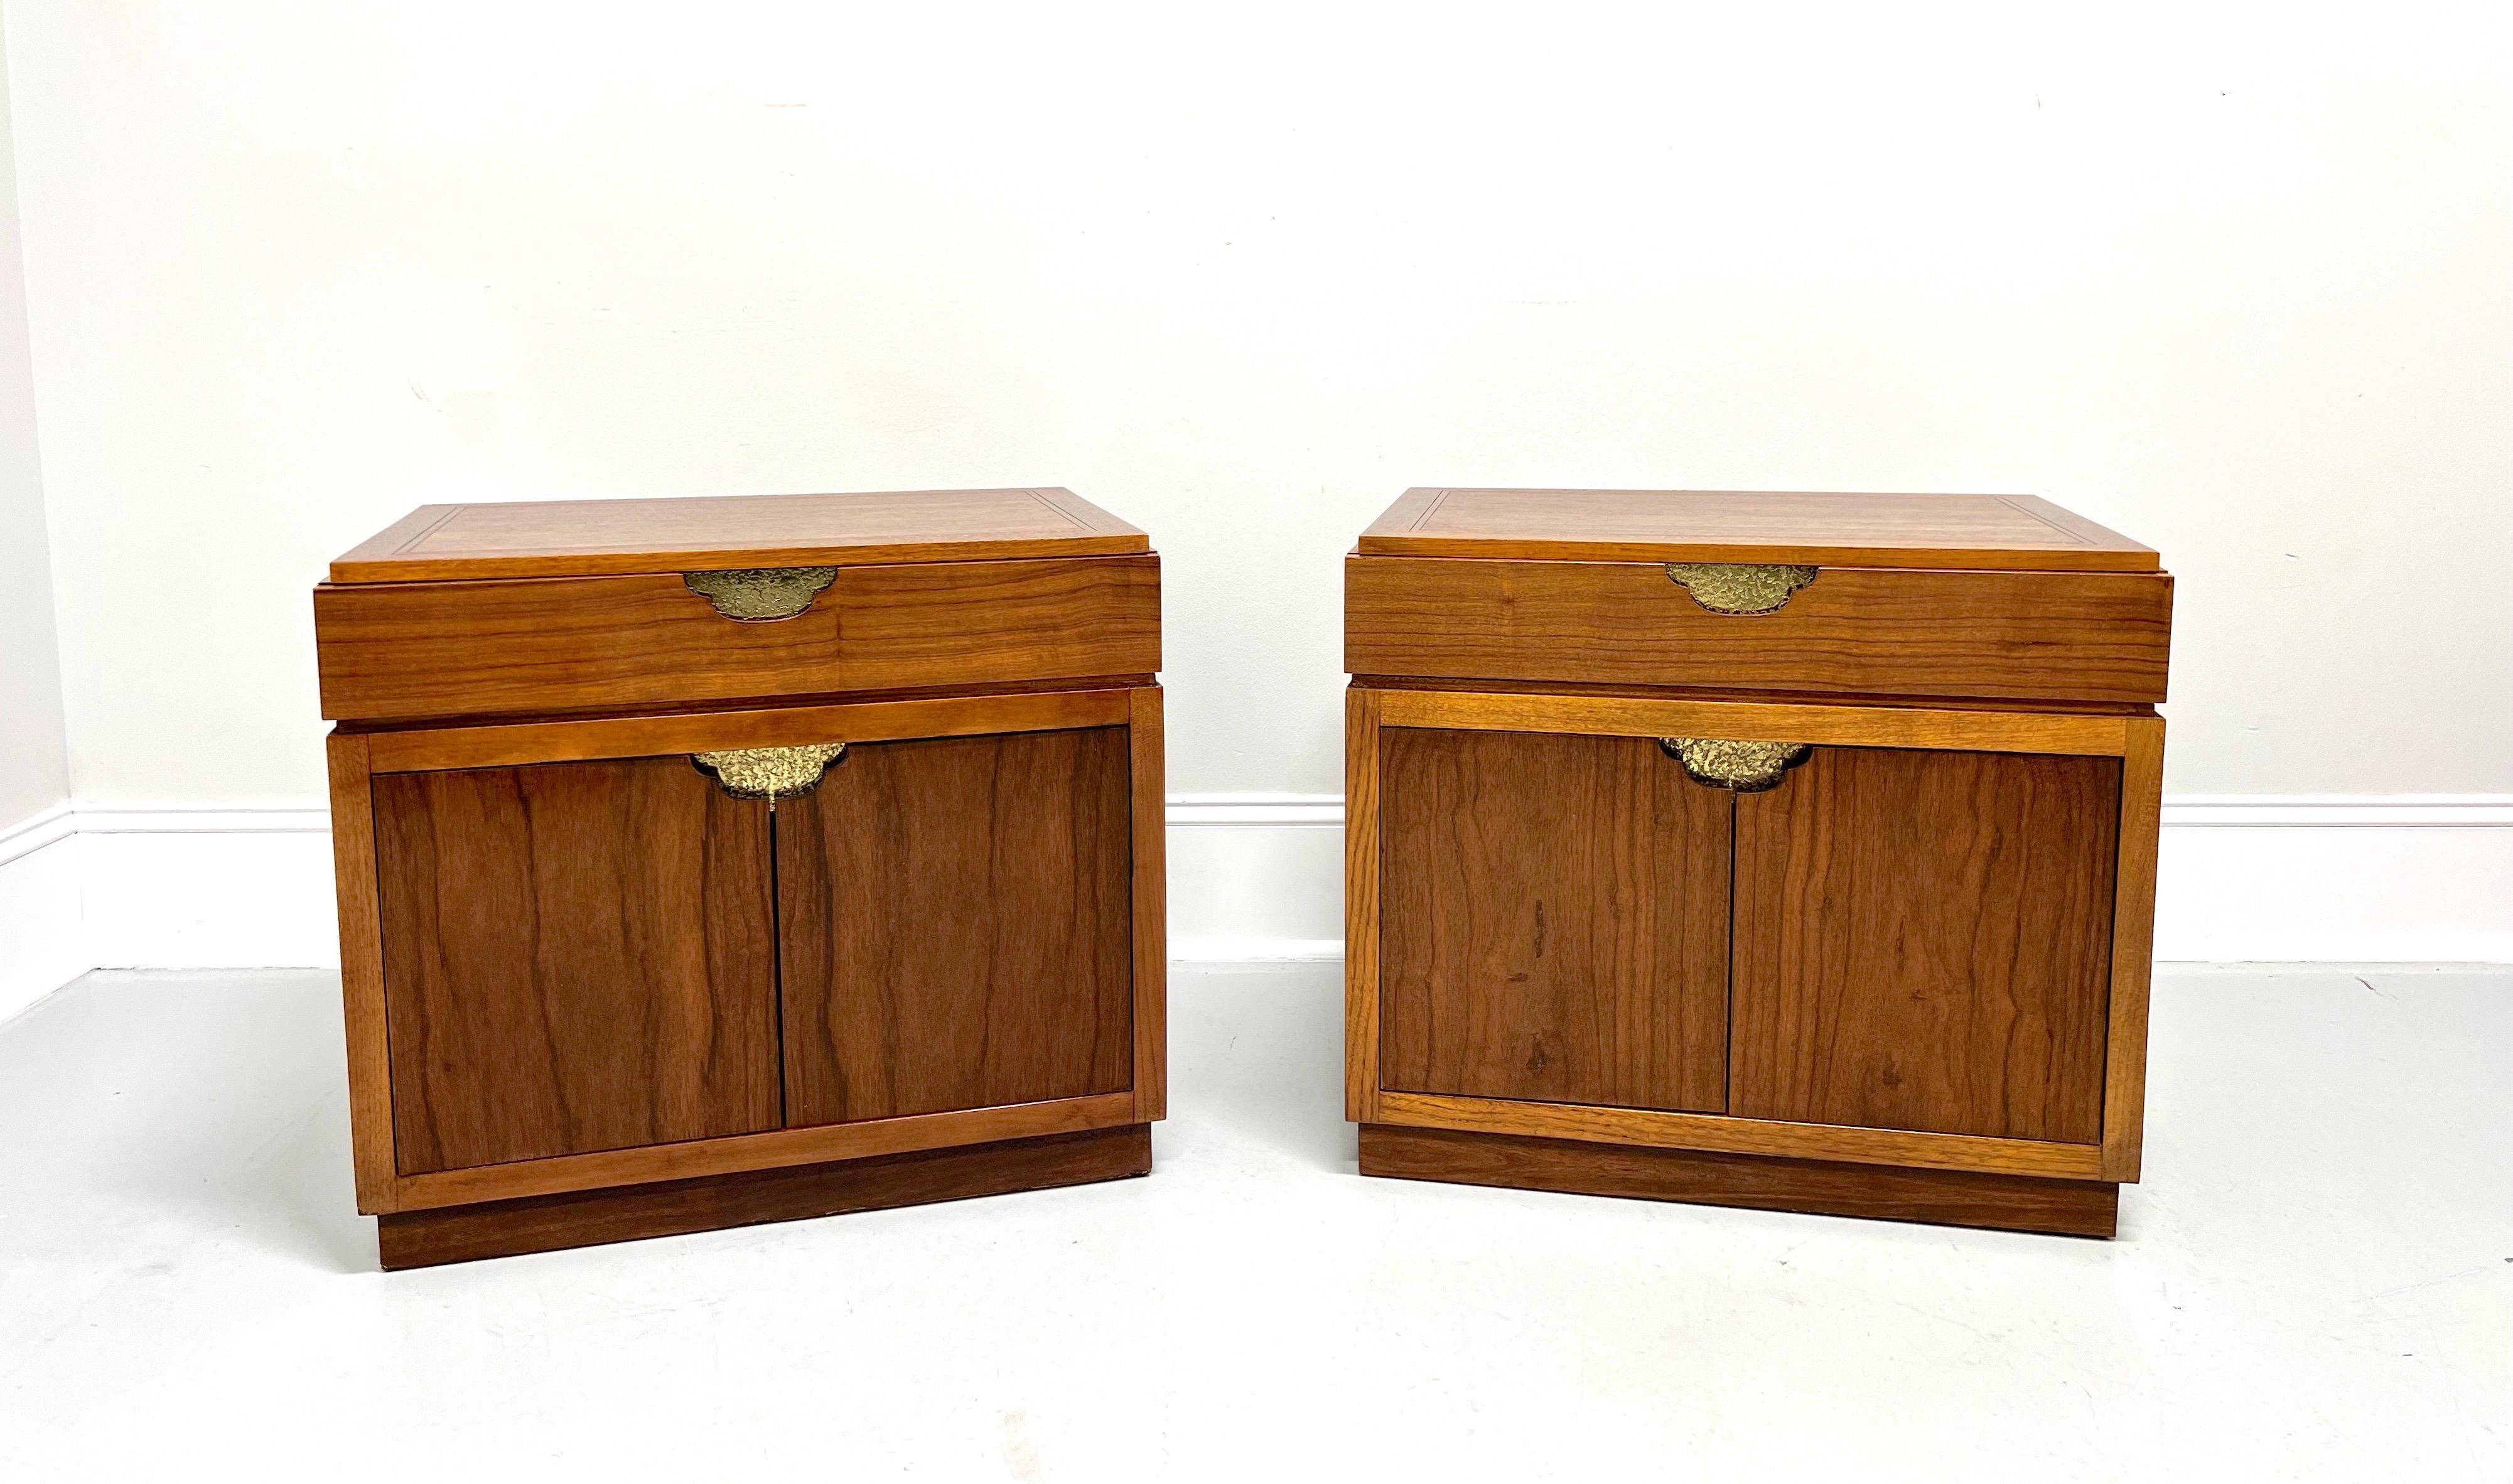 BAKER Mid 20th Century Rosewood & Walnut Asian Inspired Nightstands - Pair For Sale 6